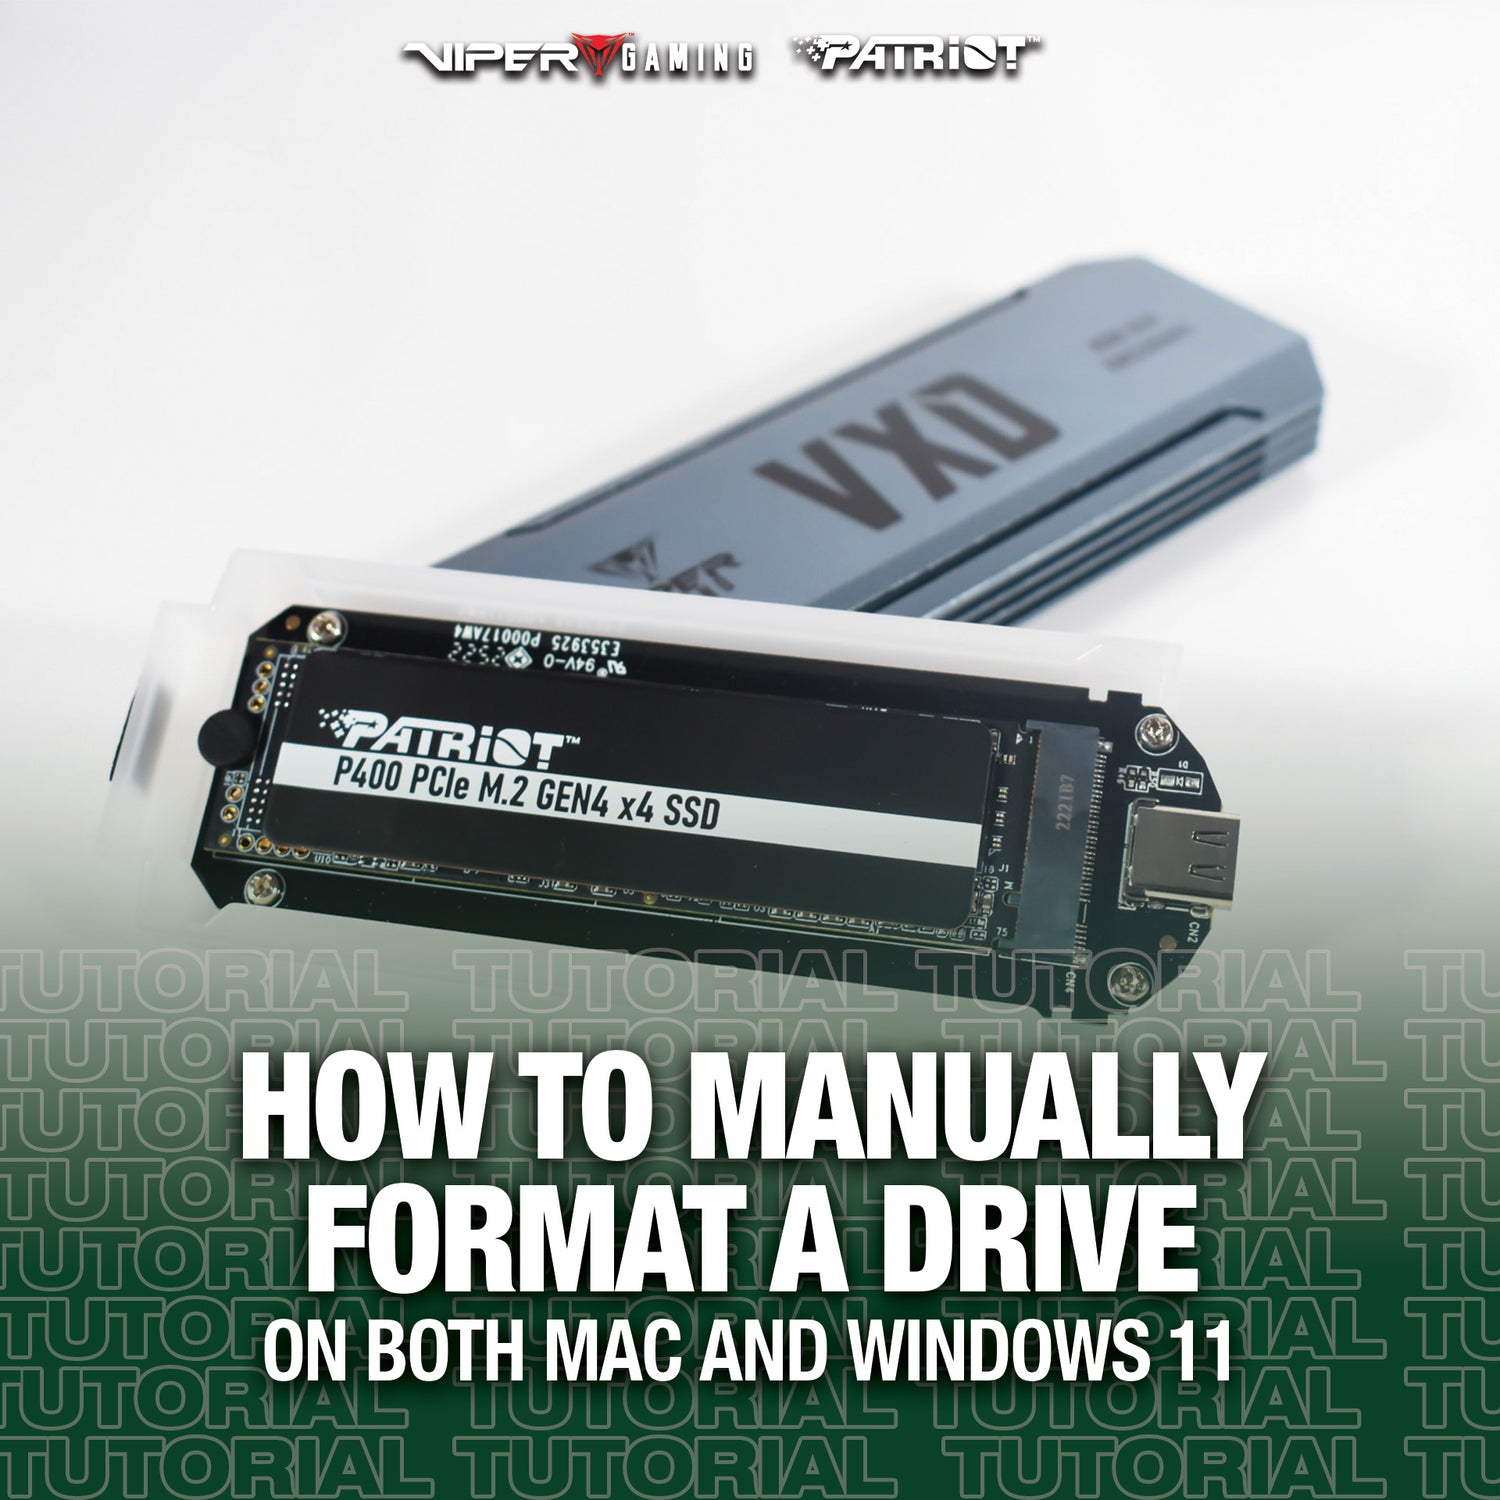 How to Manually Format a Drive for PC and Mac